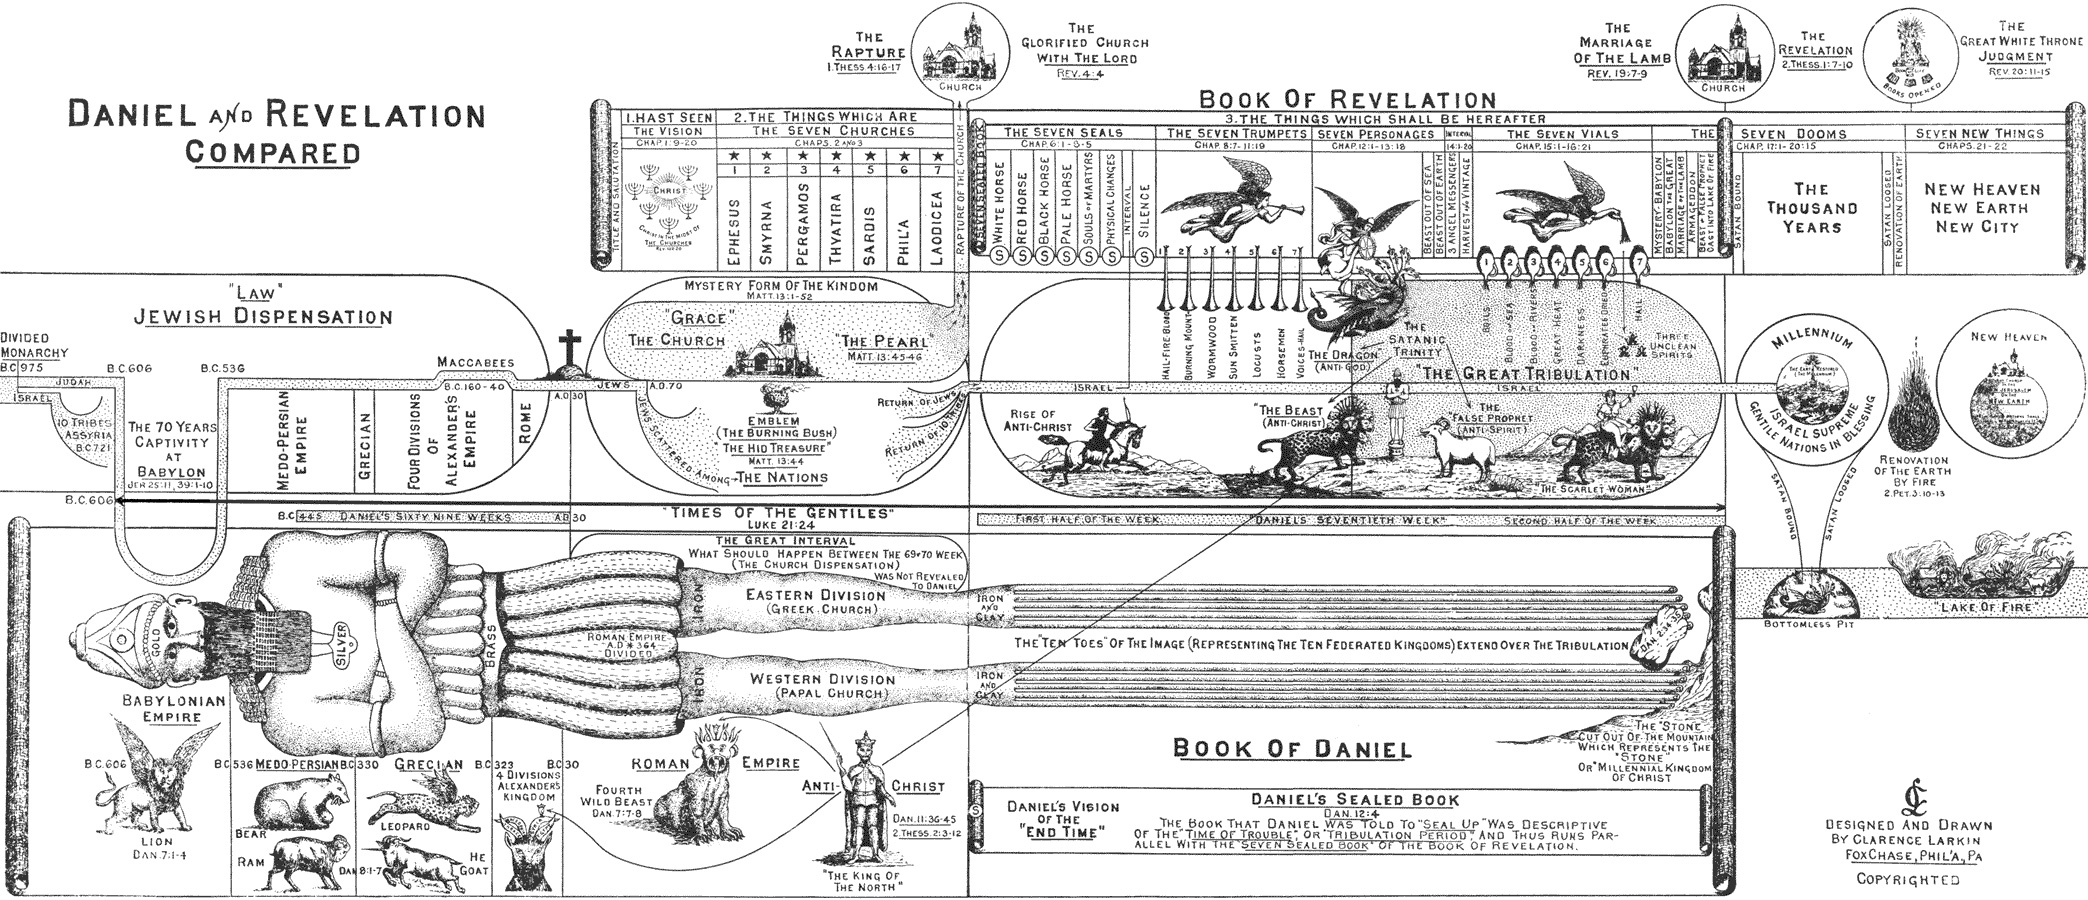 Daniel and Revelation Compared Illustration by Clarence Larkin